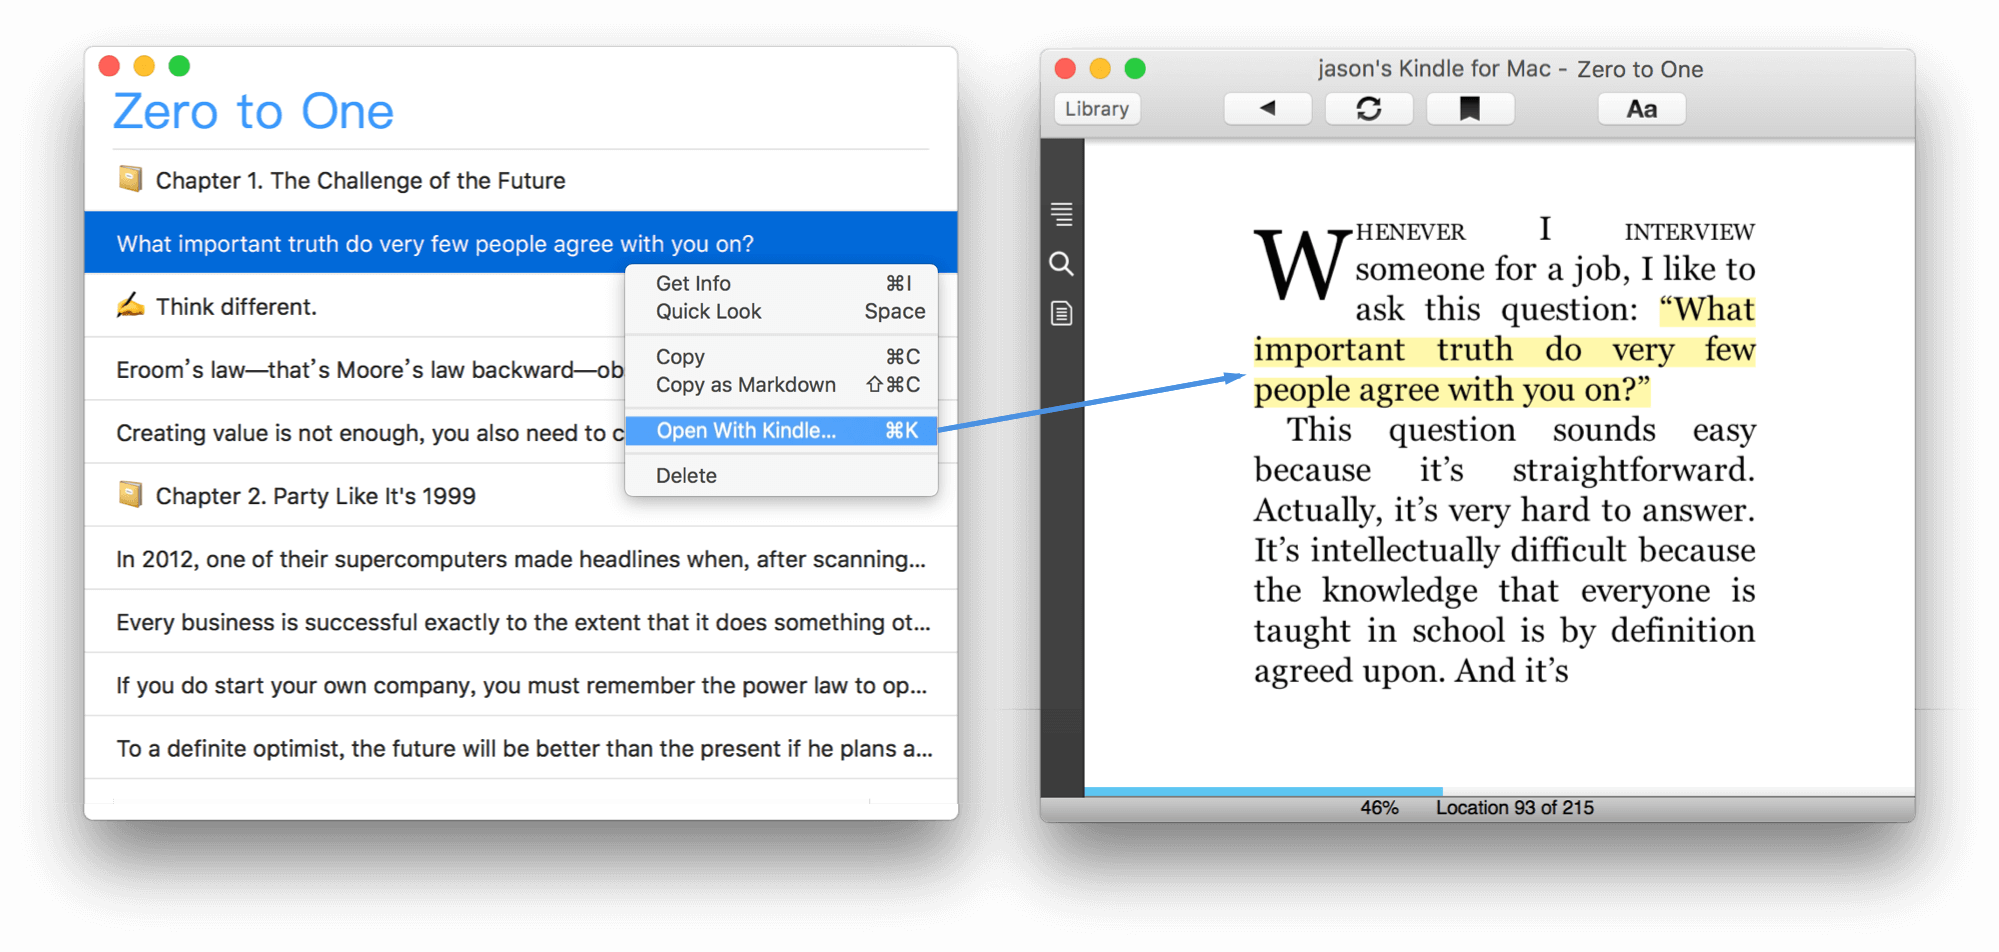 Klib support reviewing Kindle highlights and notes on macOS. Support open Kindle for macOS to review context of highlights and notes.